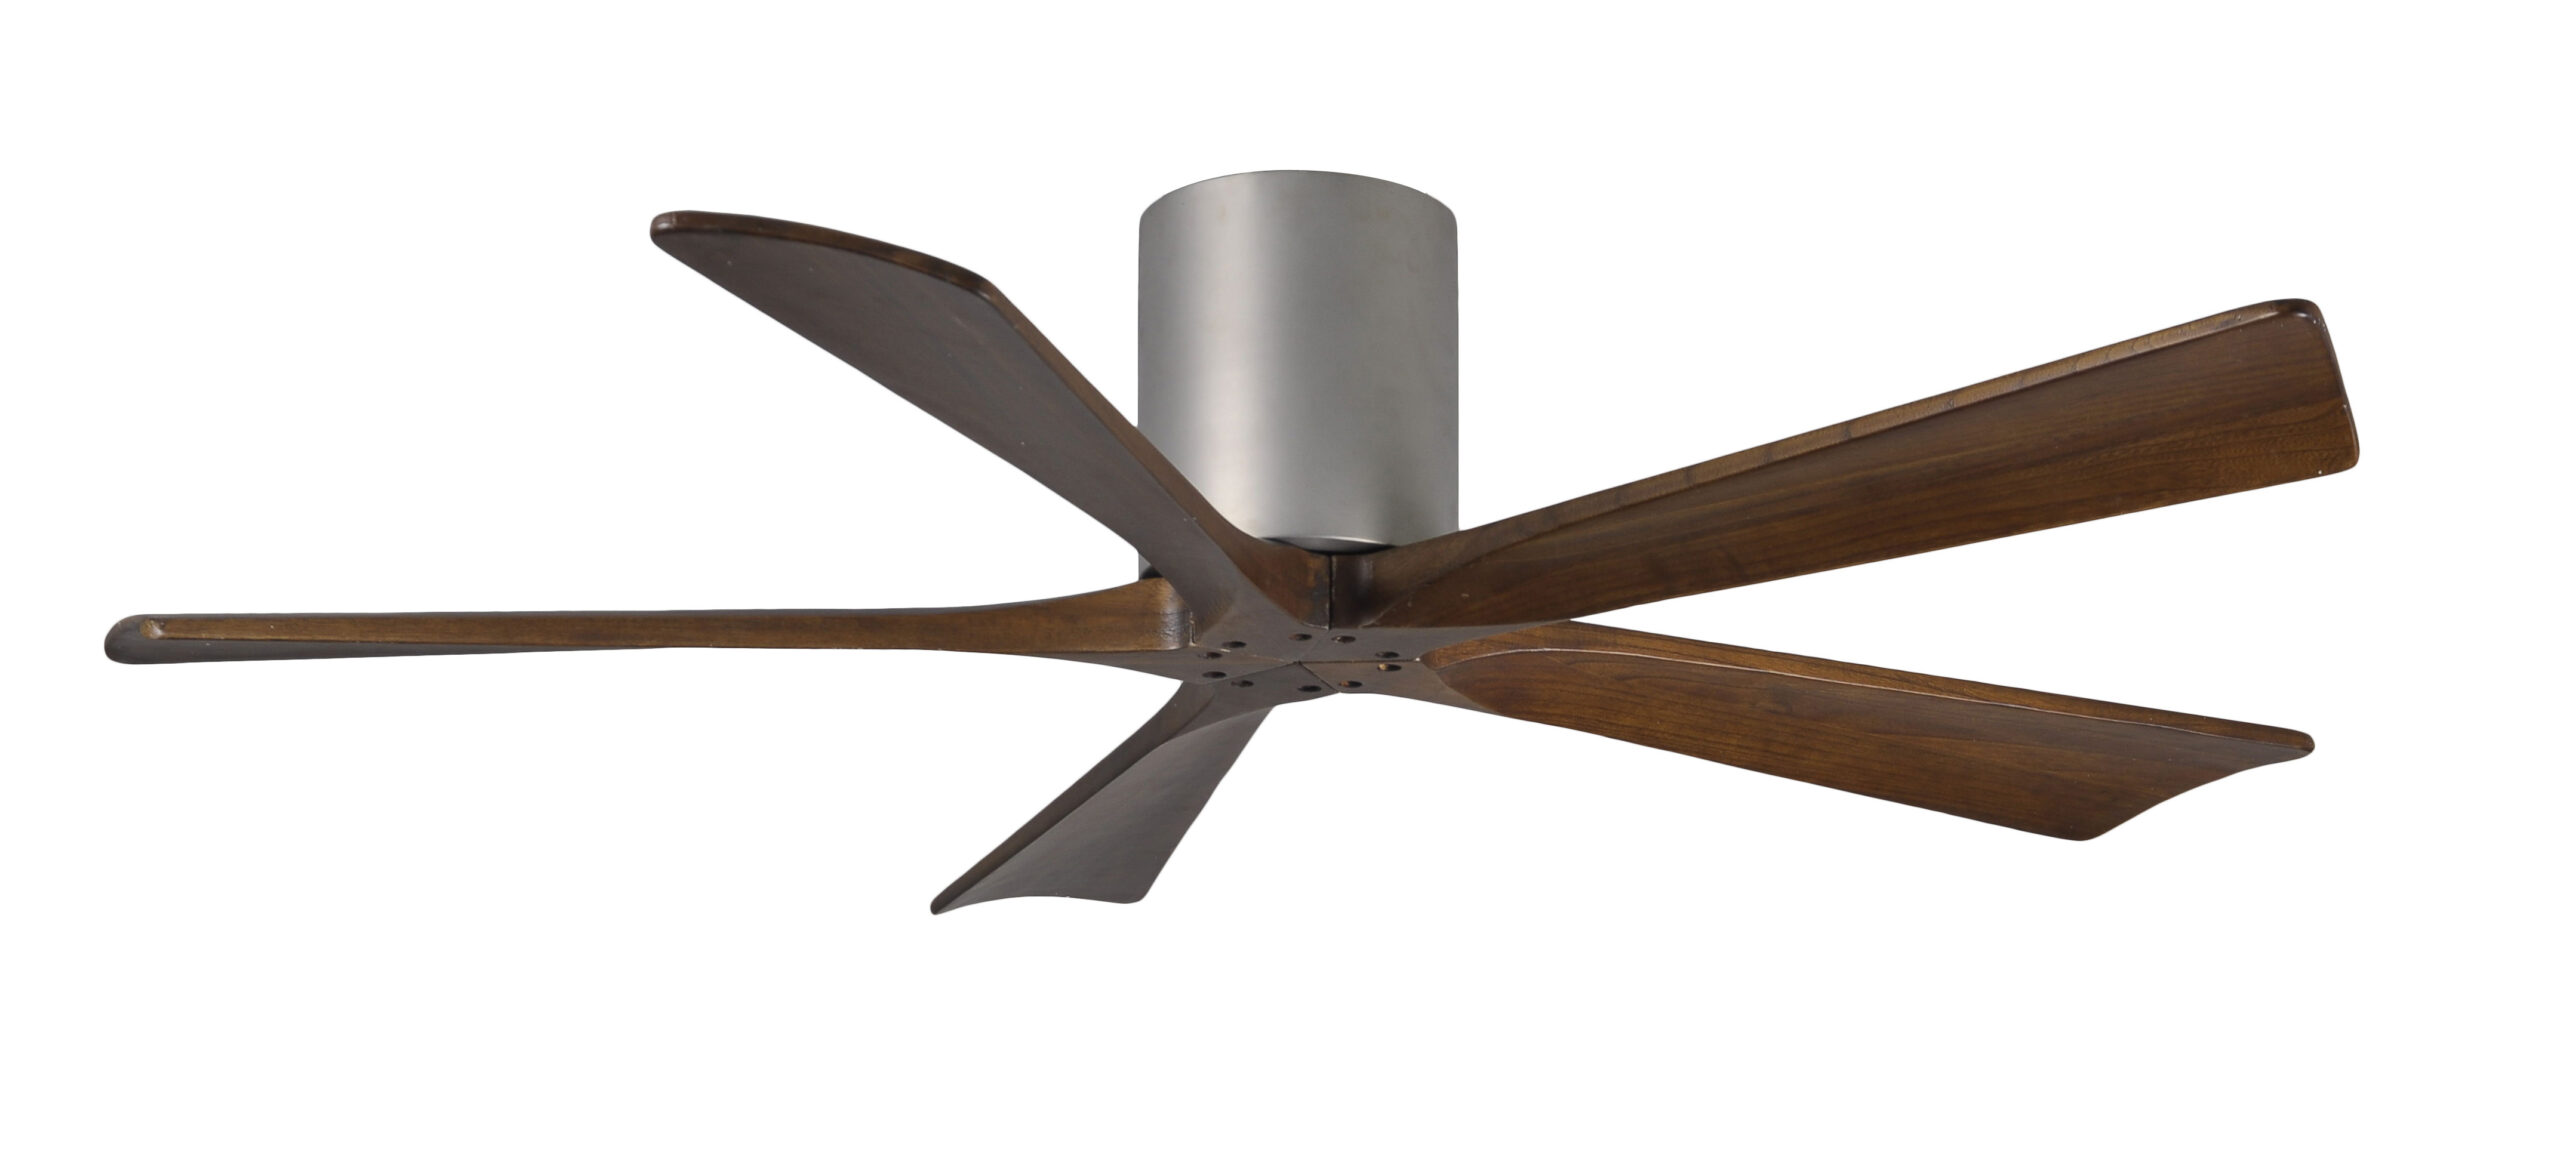 Irene-5H Ceiling Fan in Brushed Nickel Finish with 52